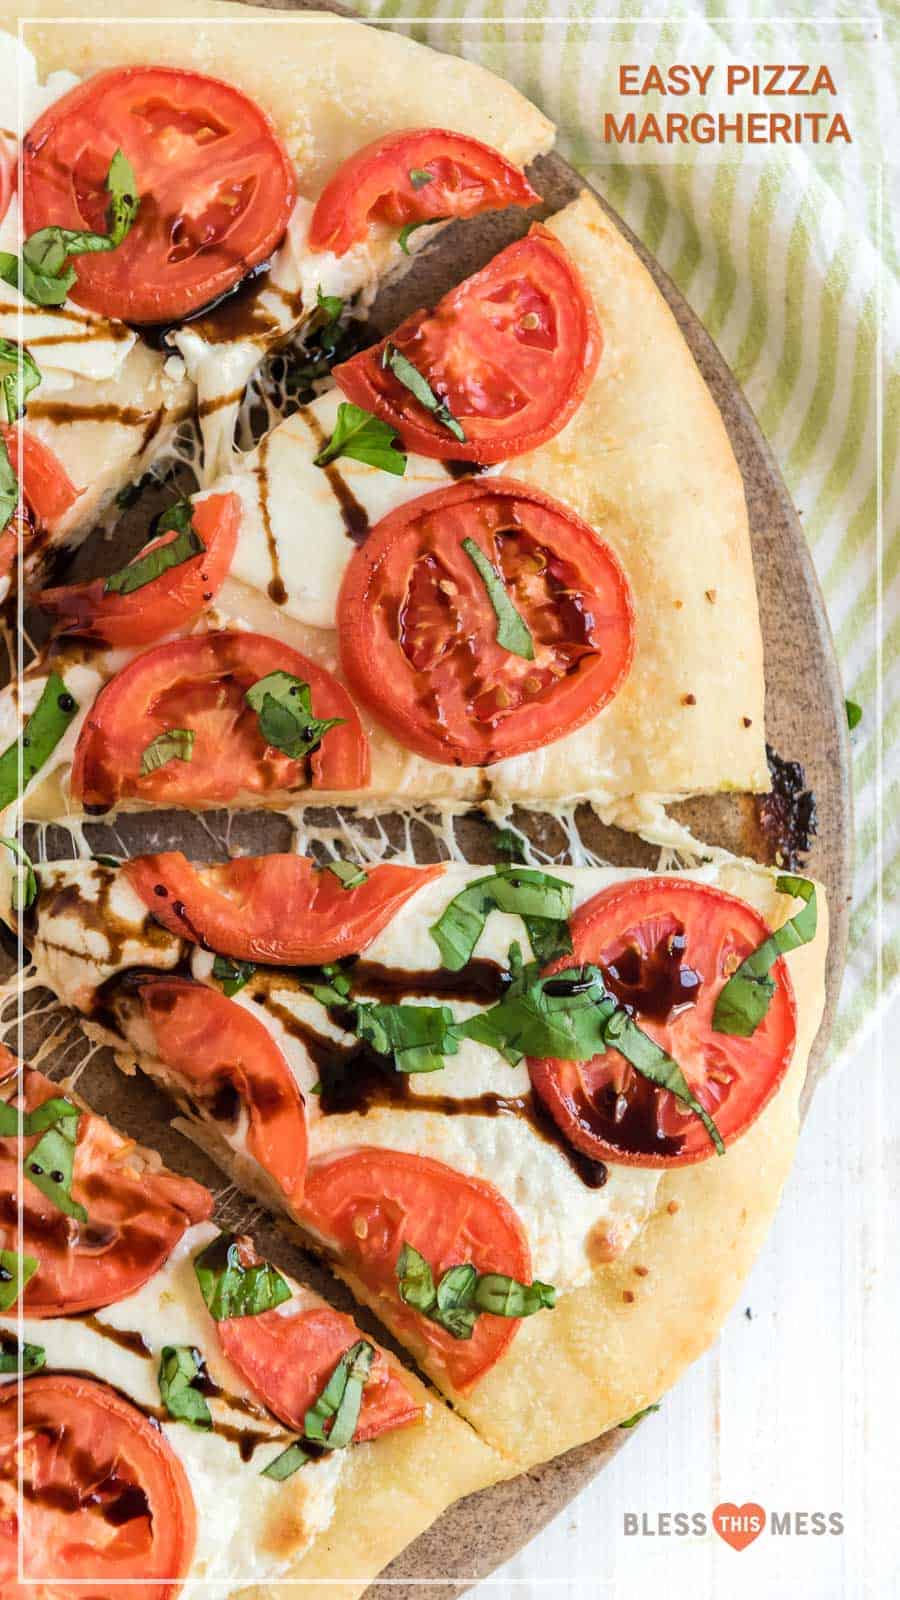 This easy margherita pizza recipe is made of a simple homemade pizza dough with fresh tomato, mozzarella, and basil for a fun and casual meal you can make at home. It's the ideal meal for a busy weeknight or a low-key movie night on the weekend, and it's beyond simple to make from scratch with minimal ingredients. #pizza #margheritapizza #margheritapizzarecipe #pizzarecipe #homemadepizza #homemadepizzadough #pizzadoughrecipe